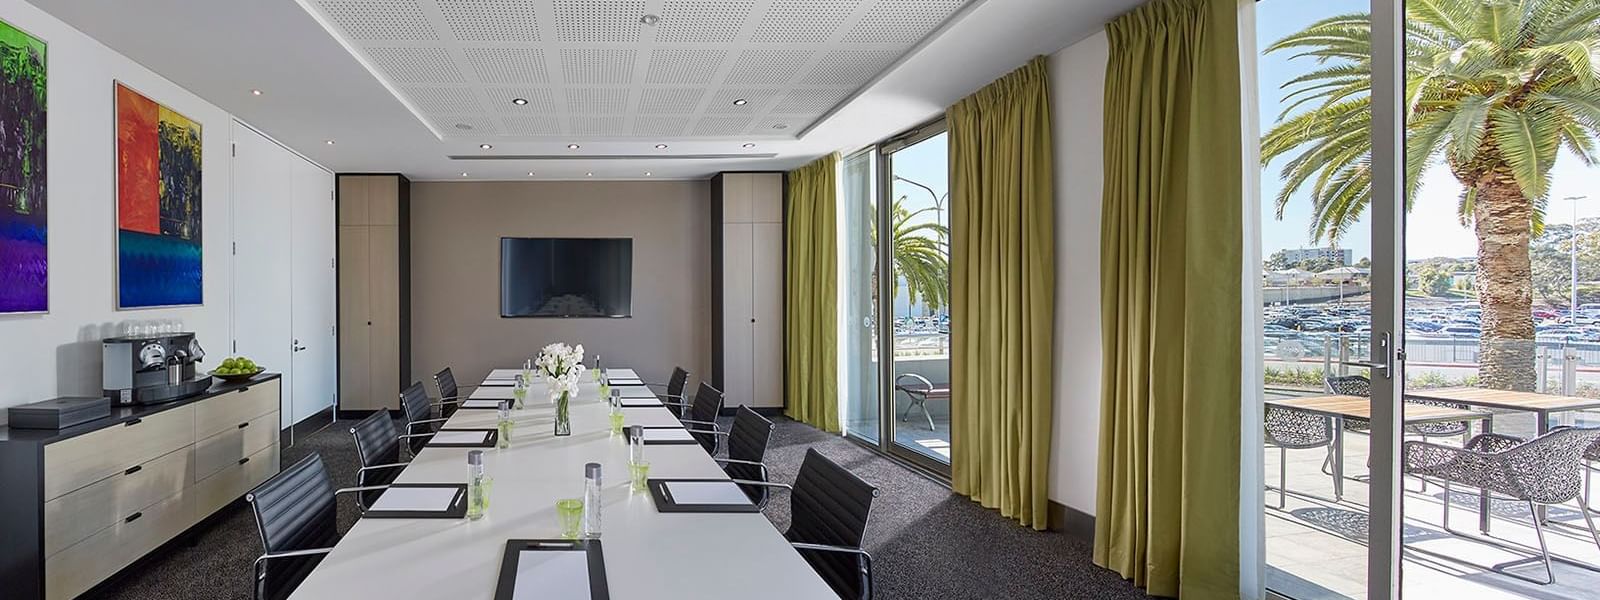 Classroom setup in Business Centre at Crown Hotel Perth